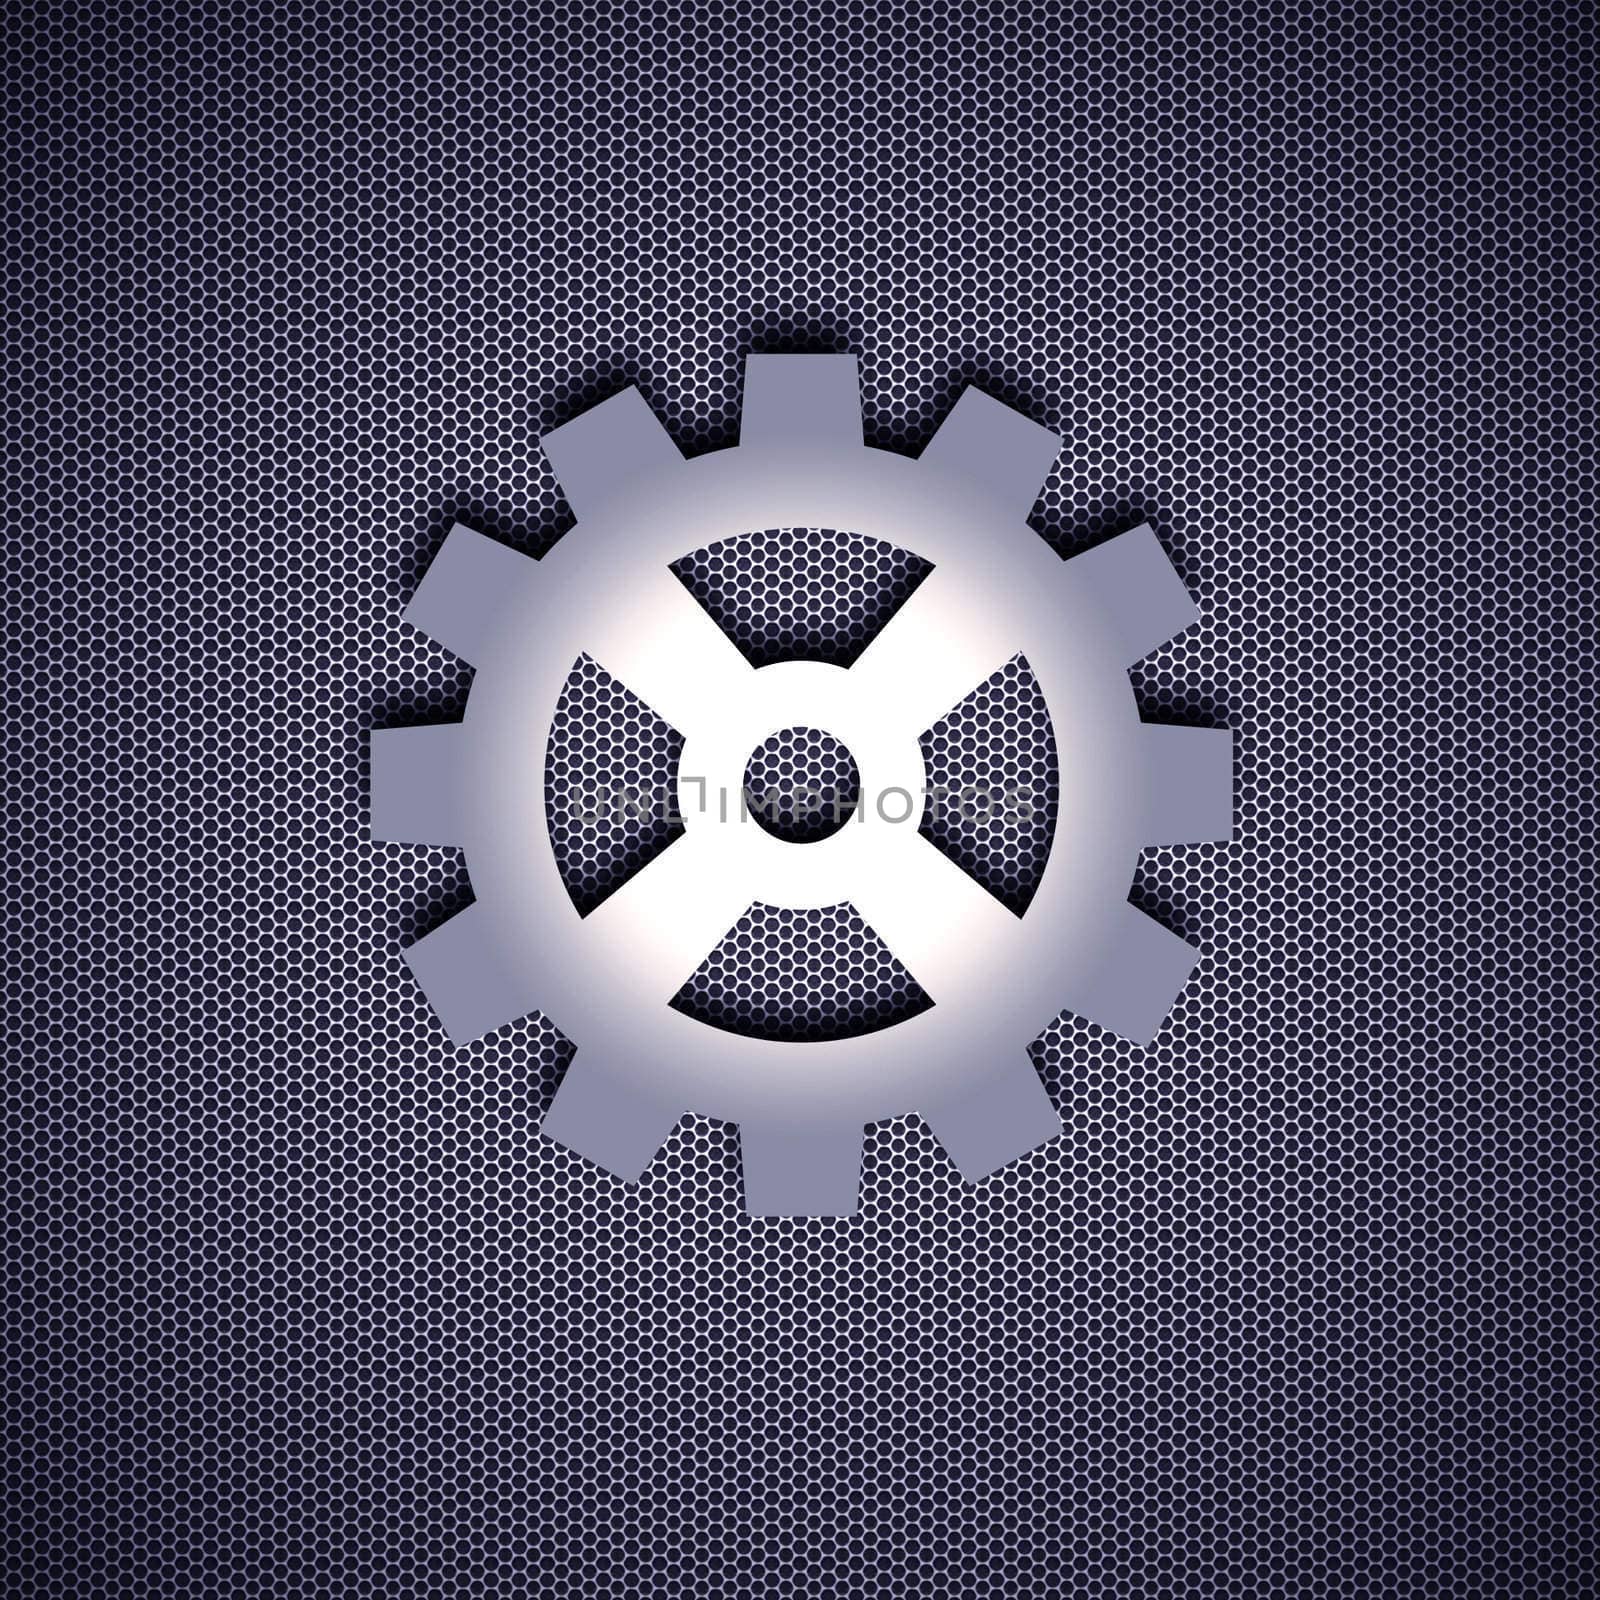 Cogwheel symbol with 3d effect, symbol isolated on metal background. Steel background.